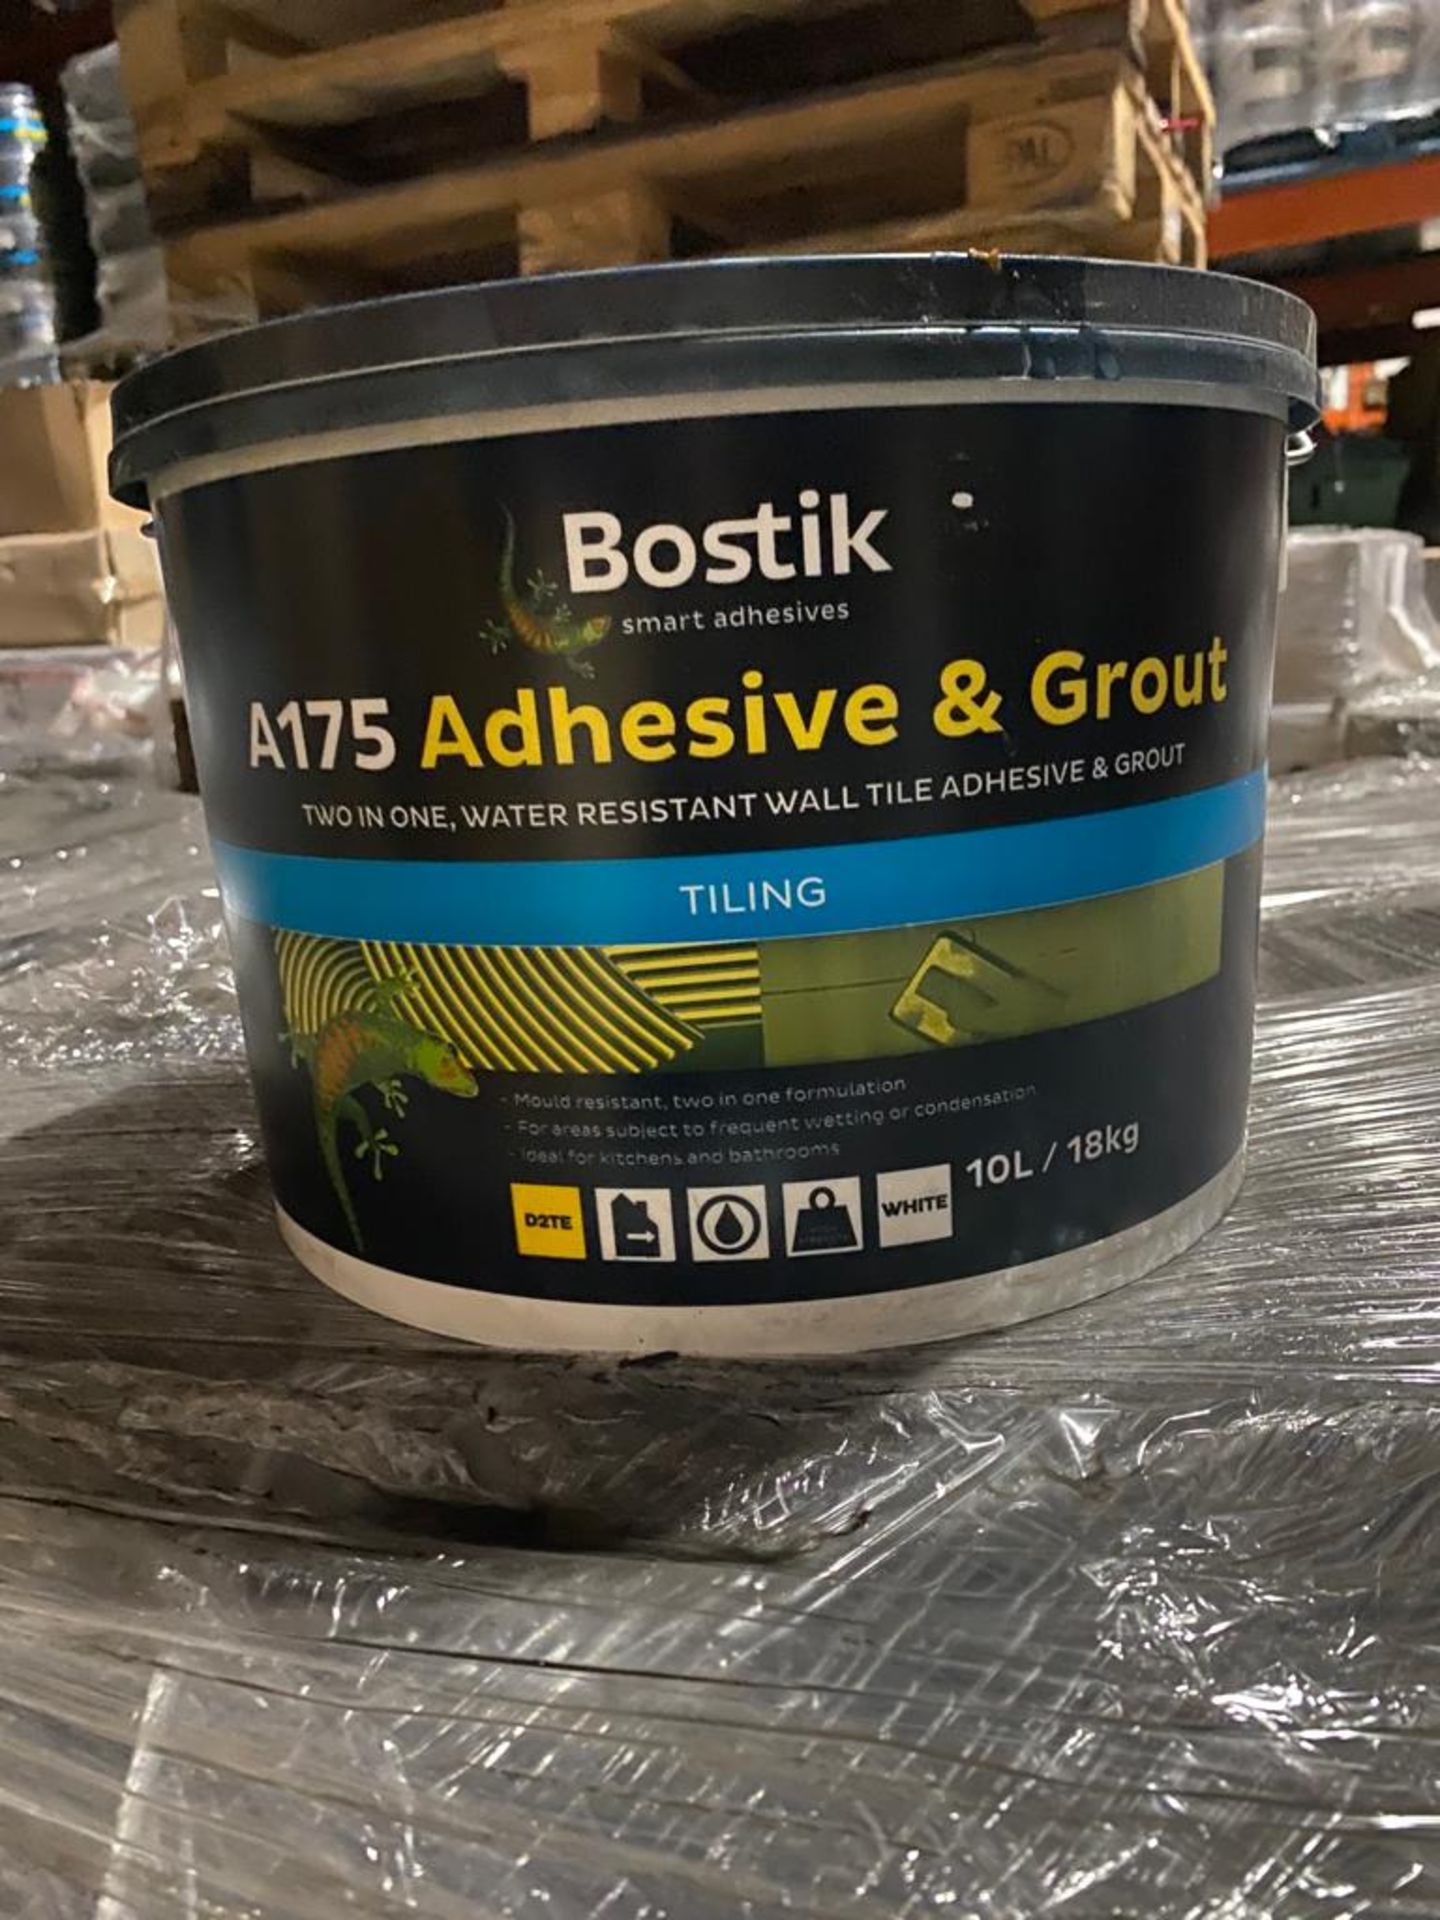 PALLET OF 48 X BOSTIK A175 ADEHESIVE & GROUT 10L